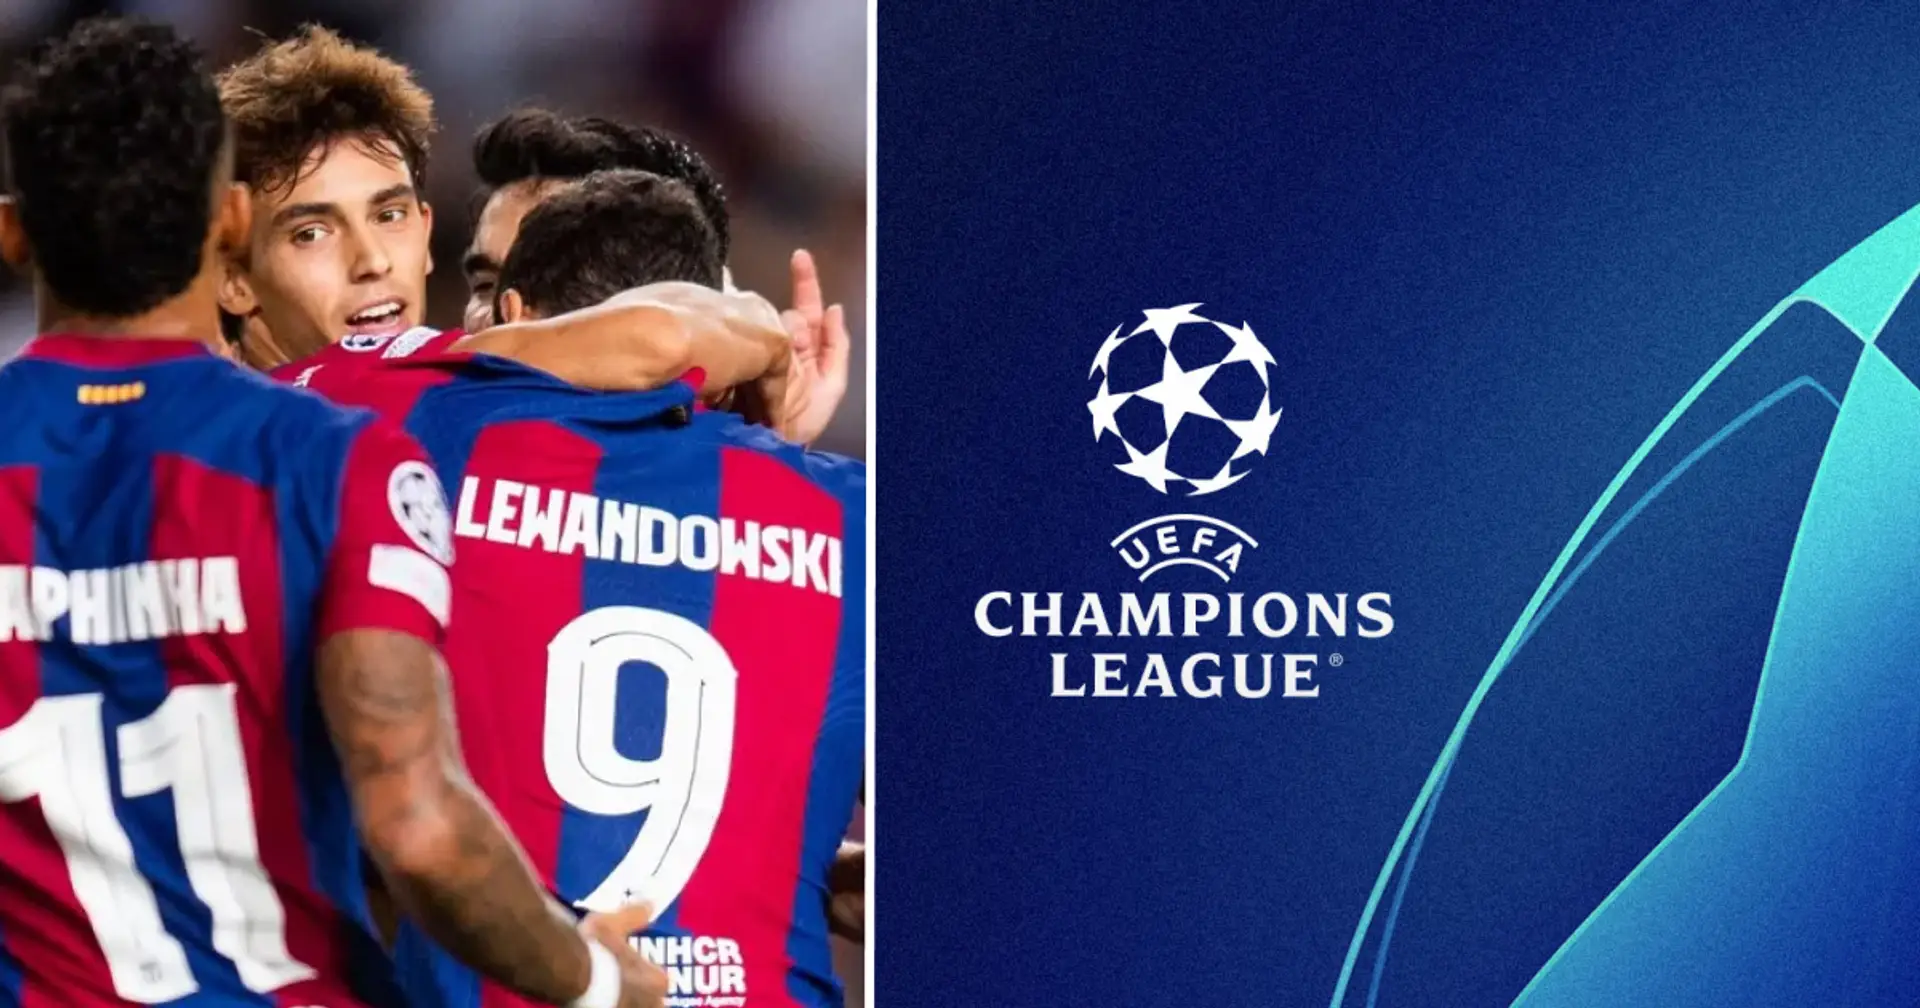 Champions League team of the week revealed — one Barca player in